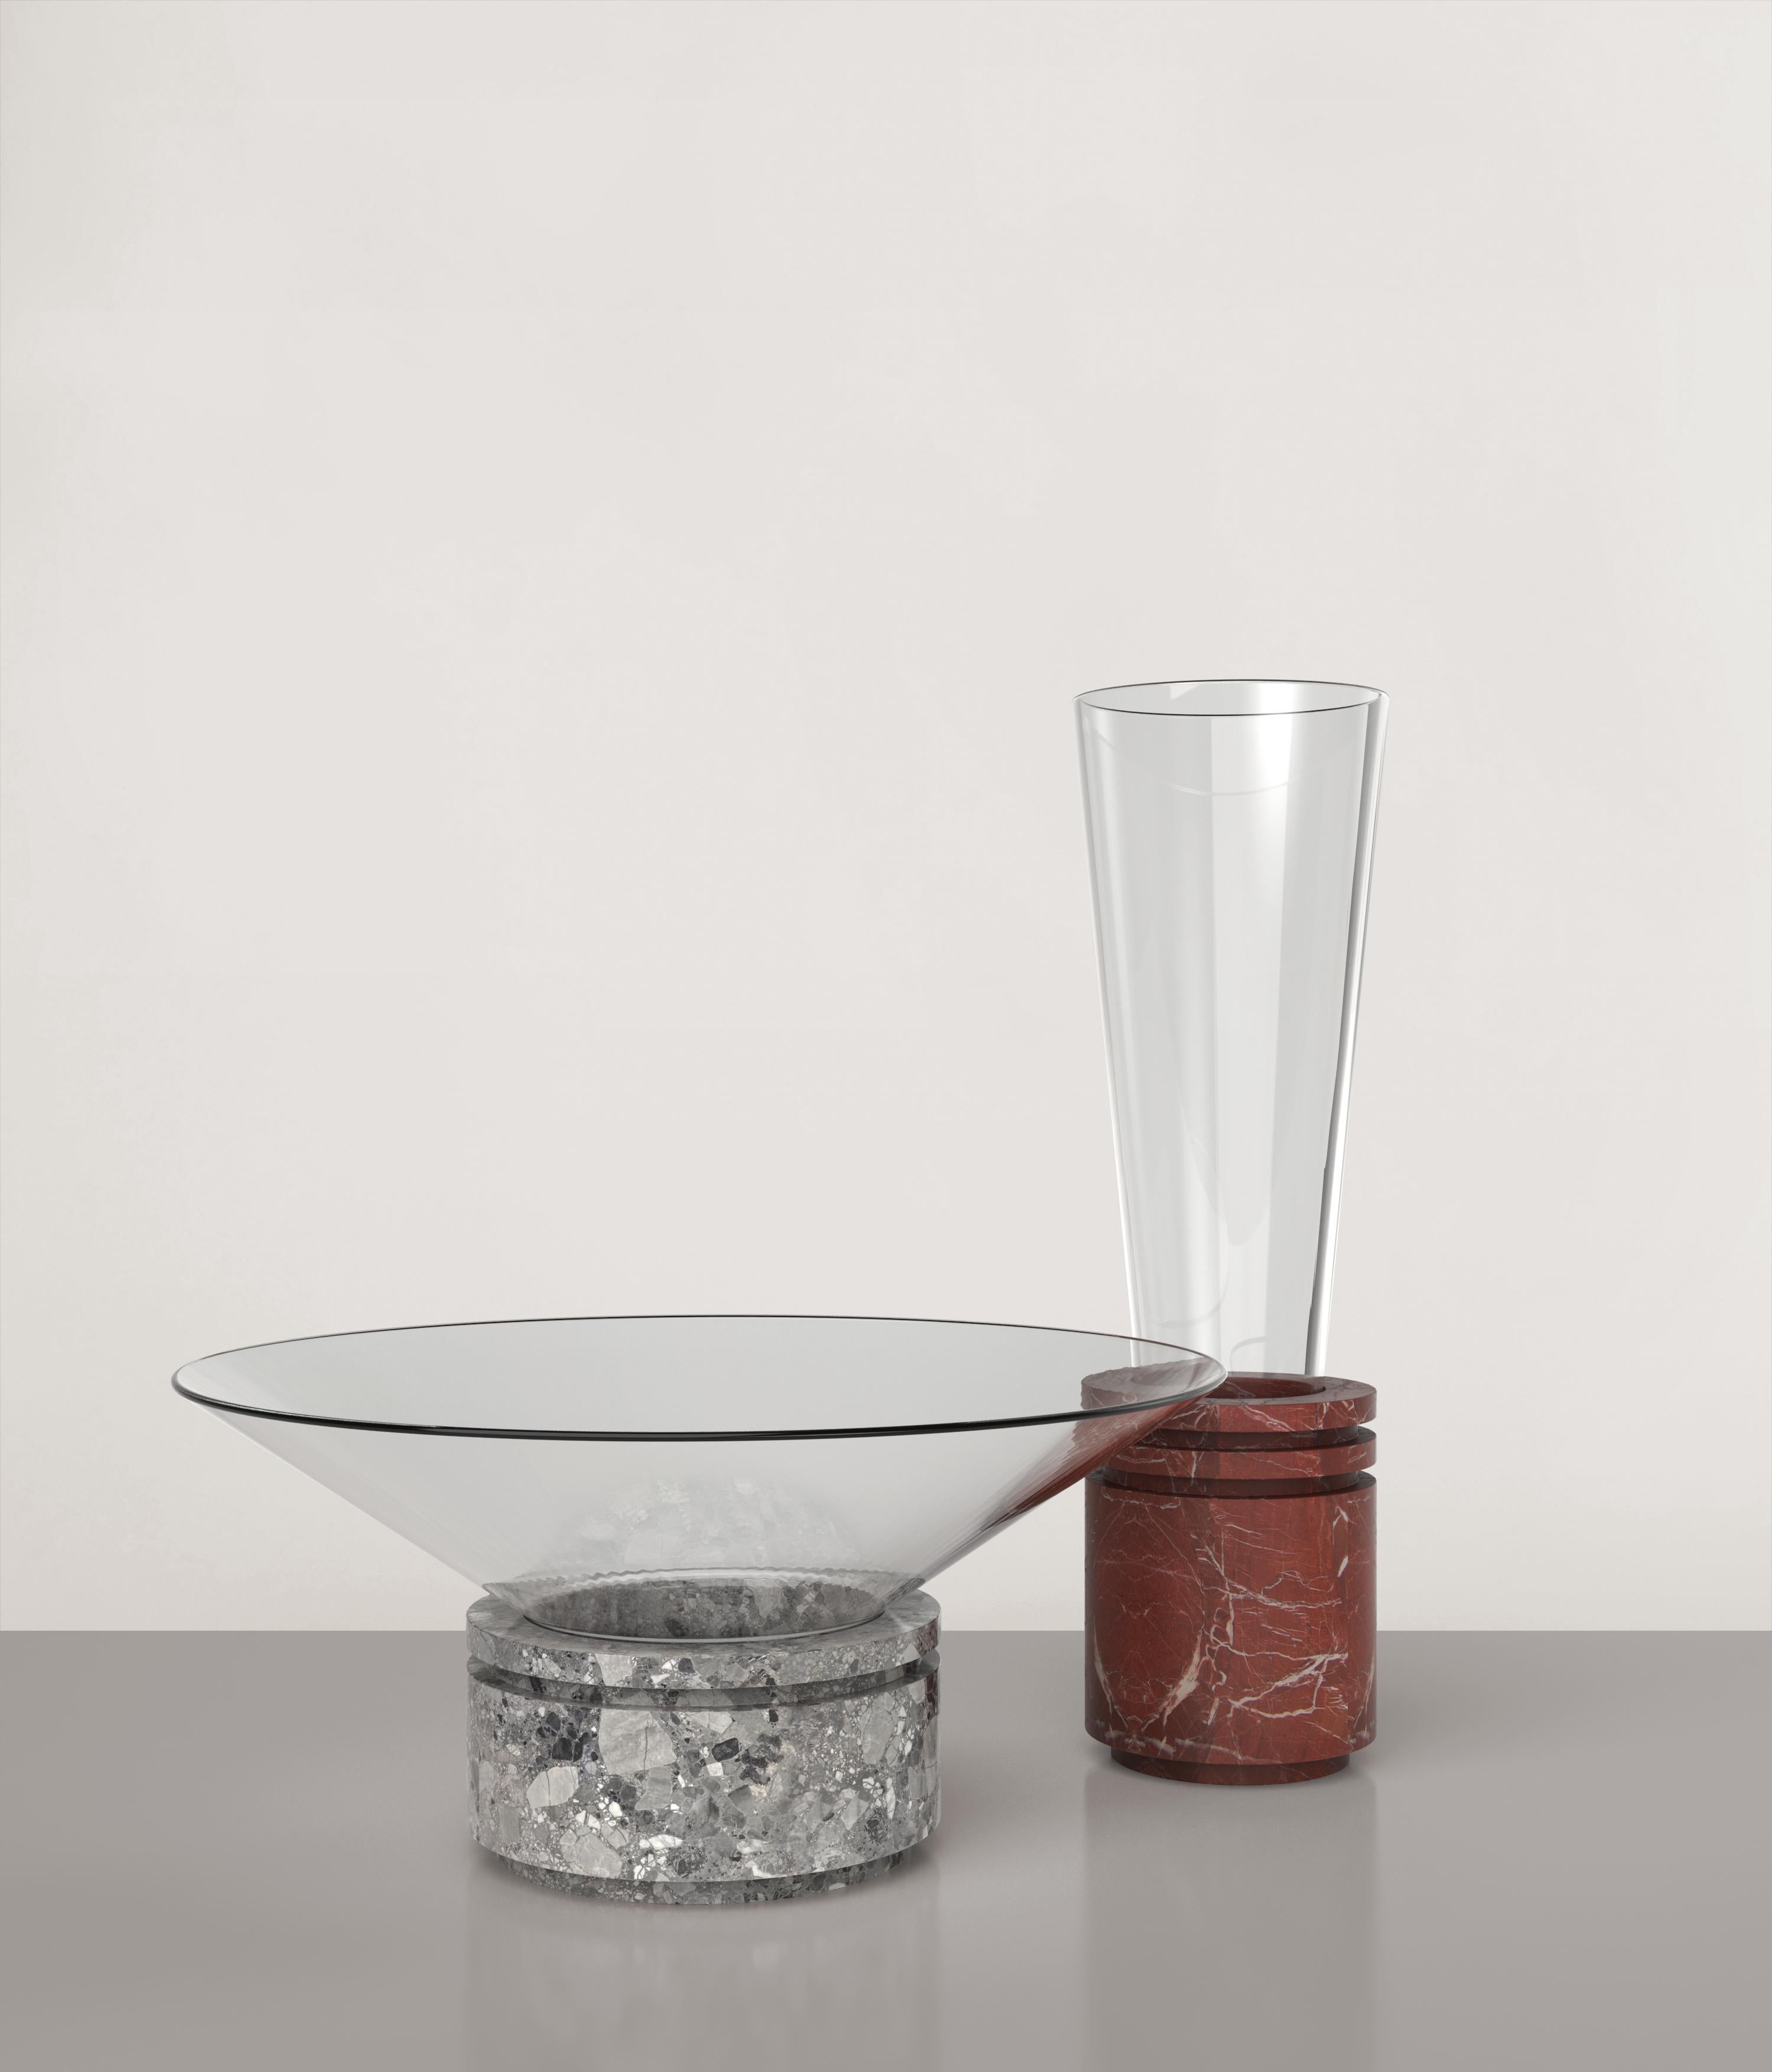 Set of Opera V1 and V2 Vases by Edizione Limitata
Limited Edition of 150 pieces. Signed and numbered.
Dimensions: D12 x H40 cm// D35 x H16.5
Materials: Oreo Grey + Shiny Glass//Rosso Balmoral + Shiny Glass
Also availailable in different